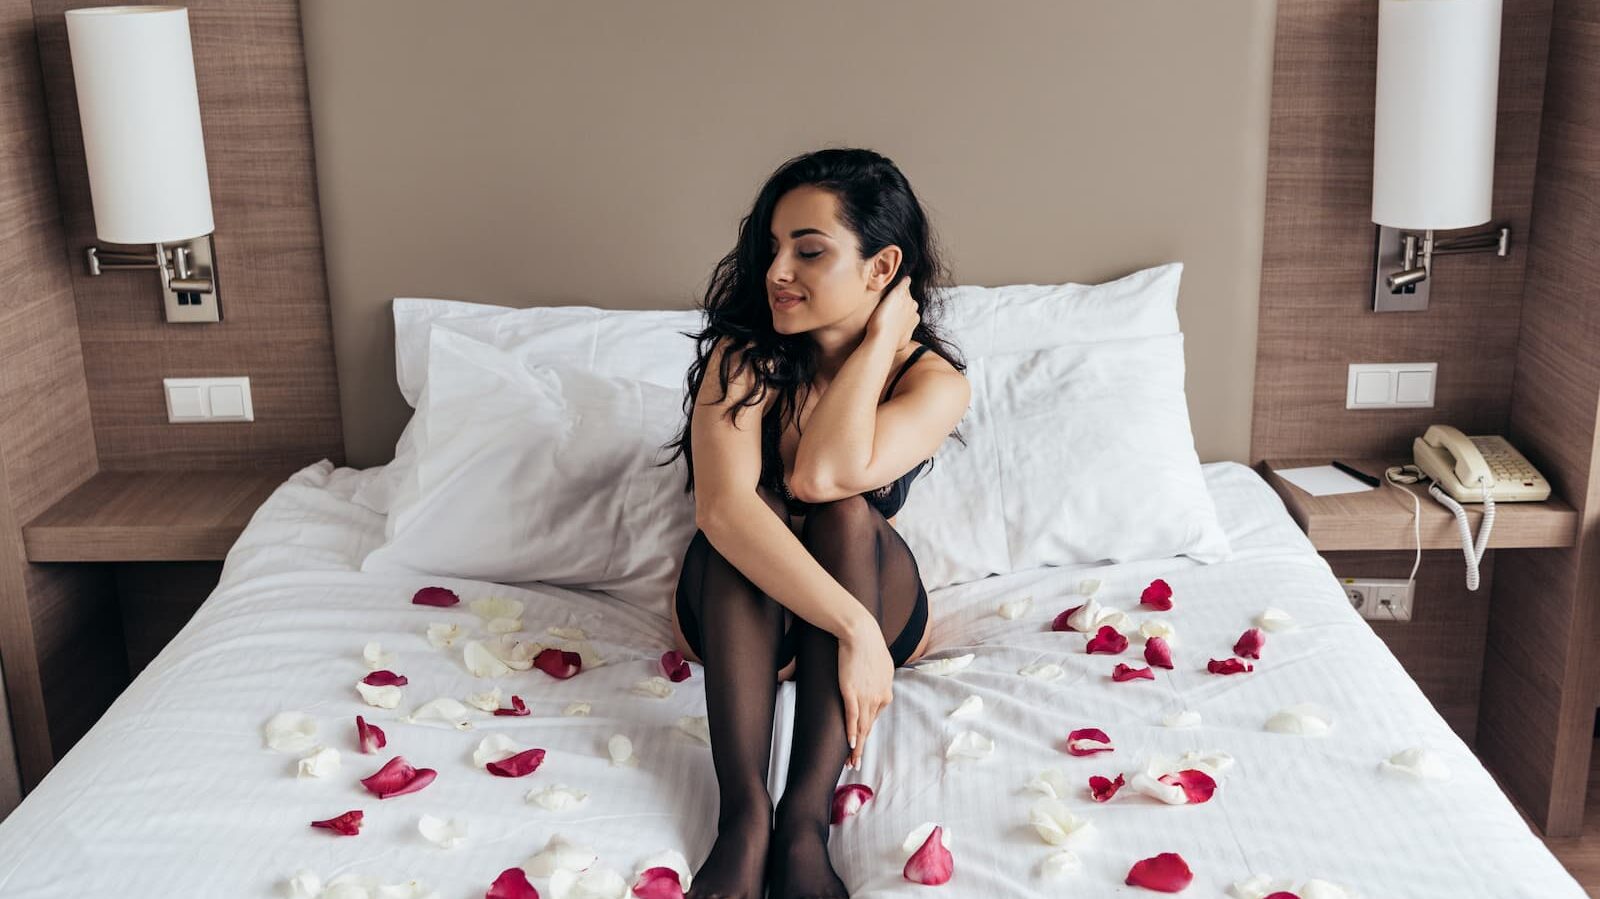 Sexy brunette girl in black stockings sitting on bed with rose petals.